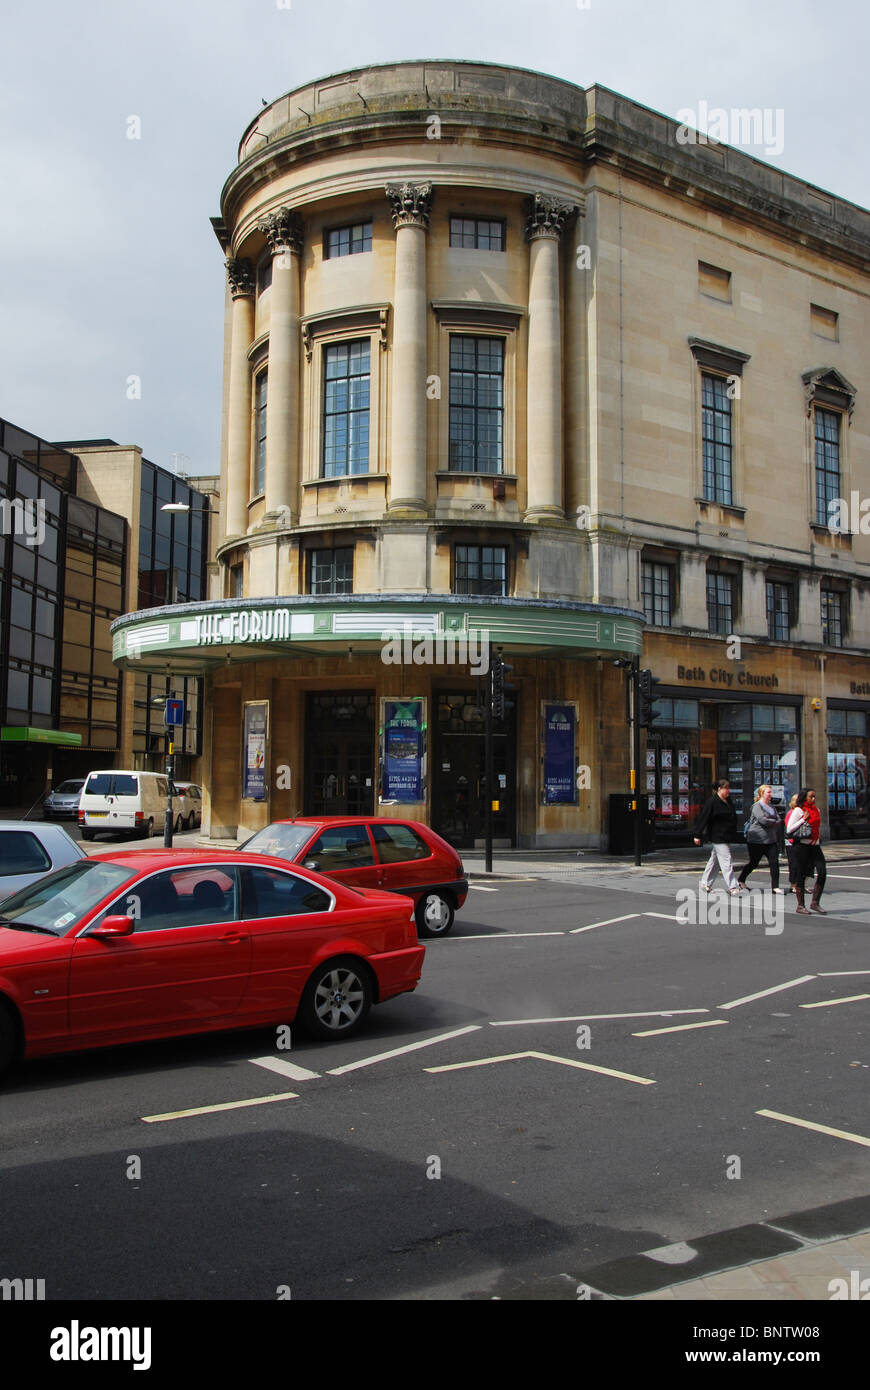 The Forum, conference and concert venue, Bath UK Stock Photo